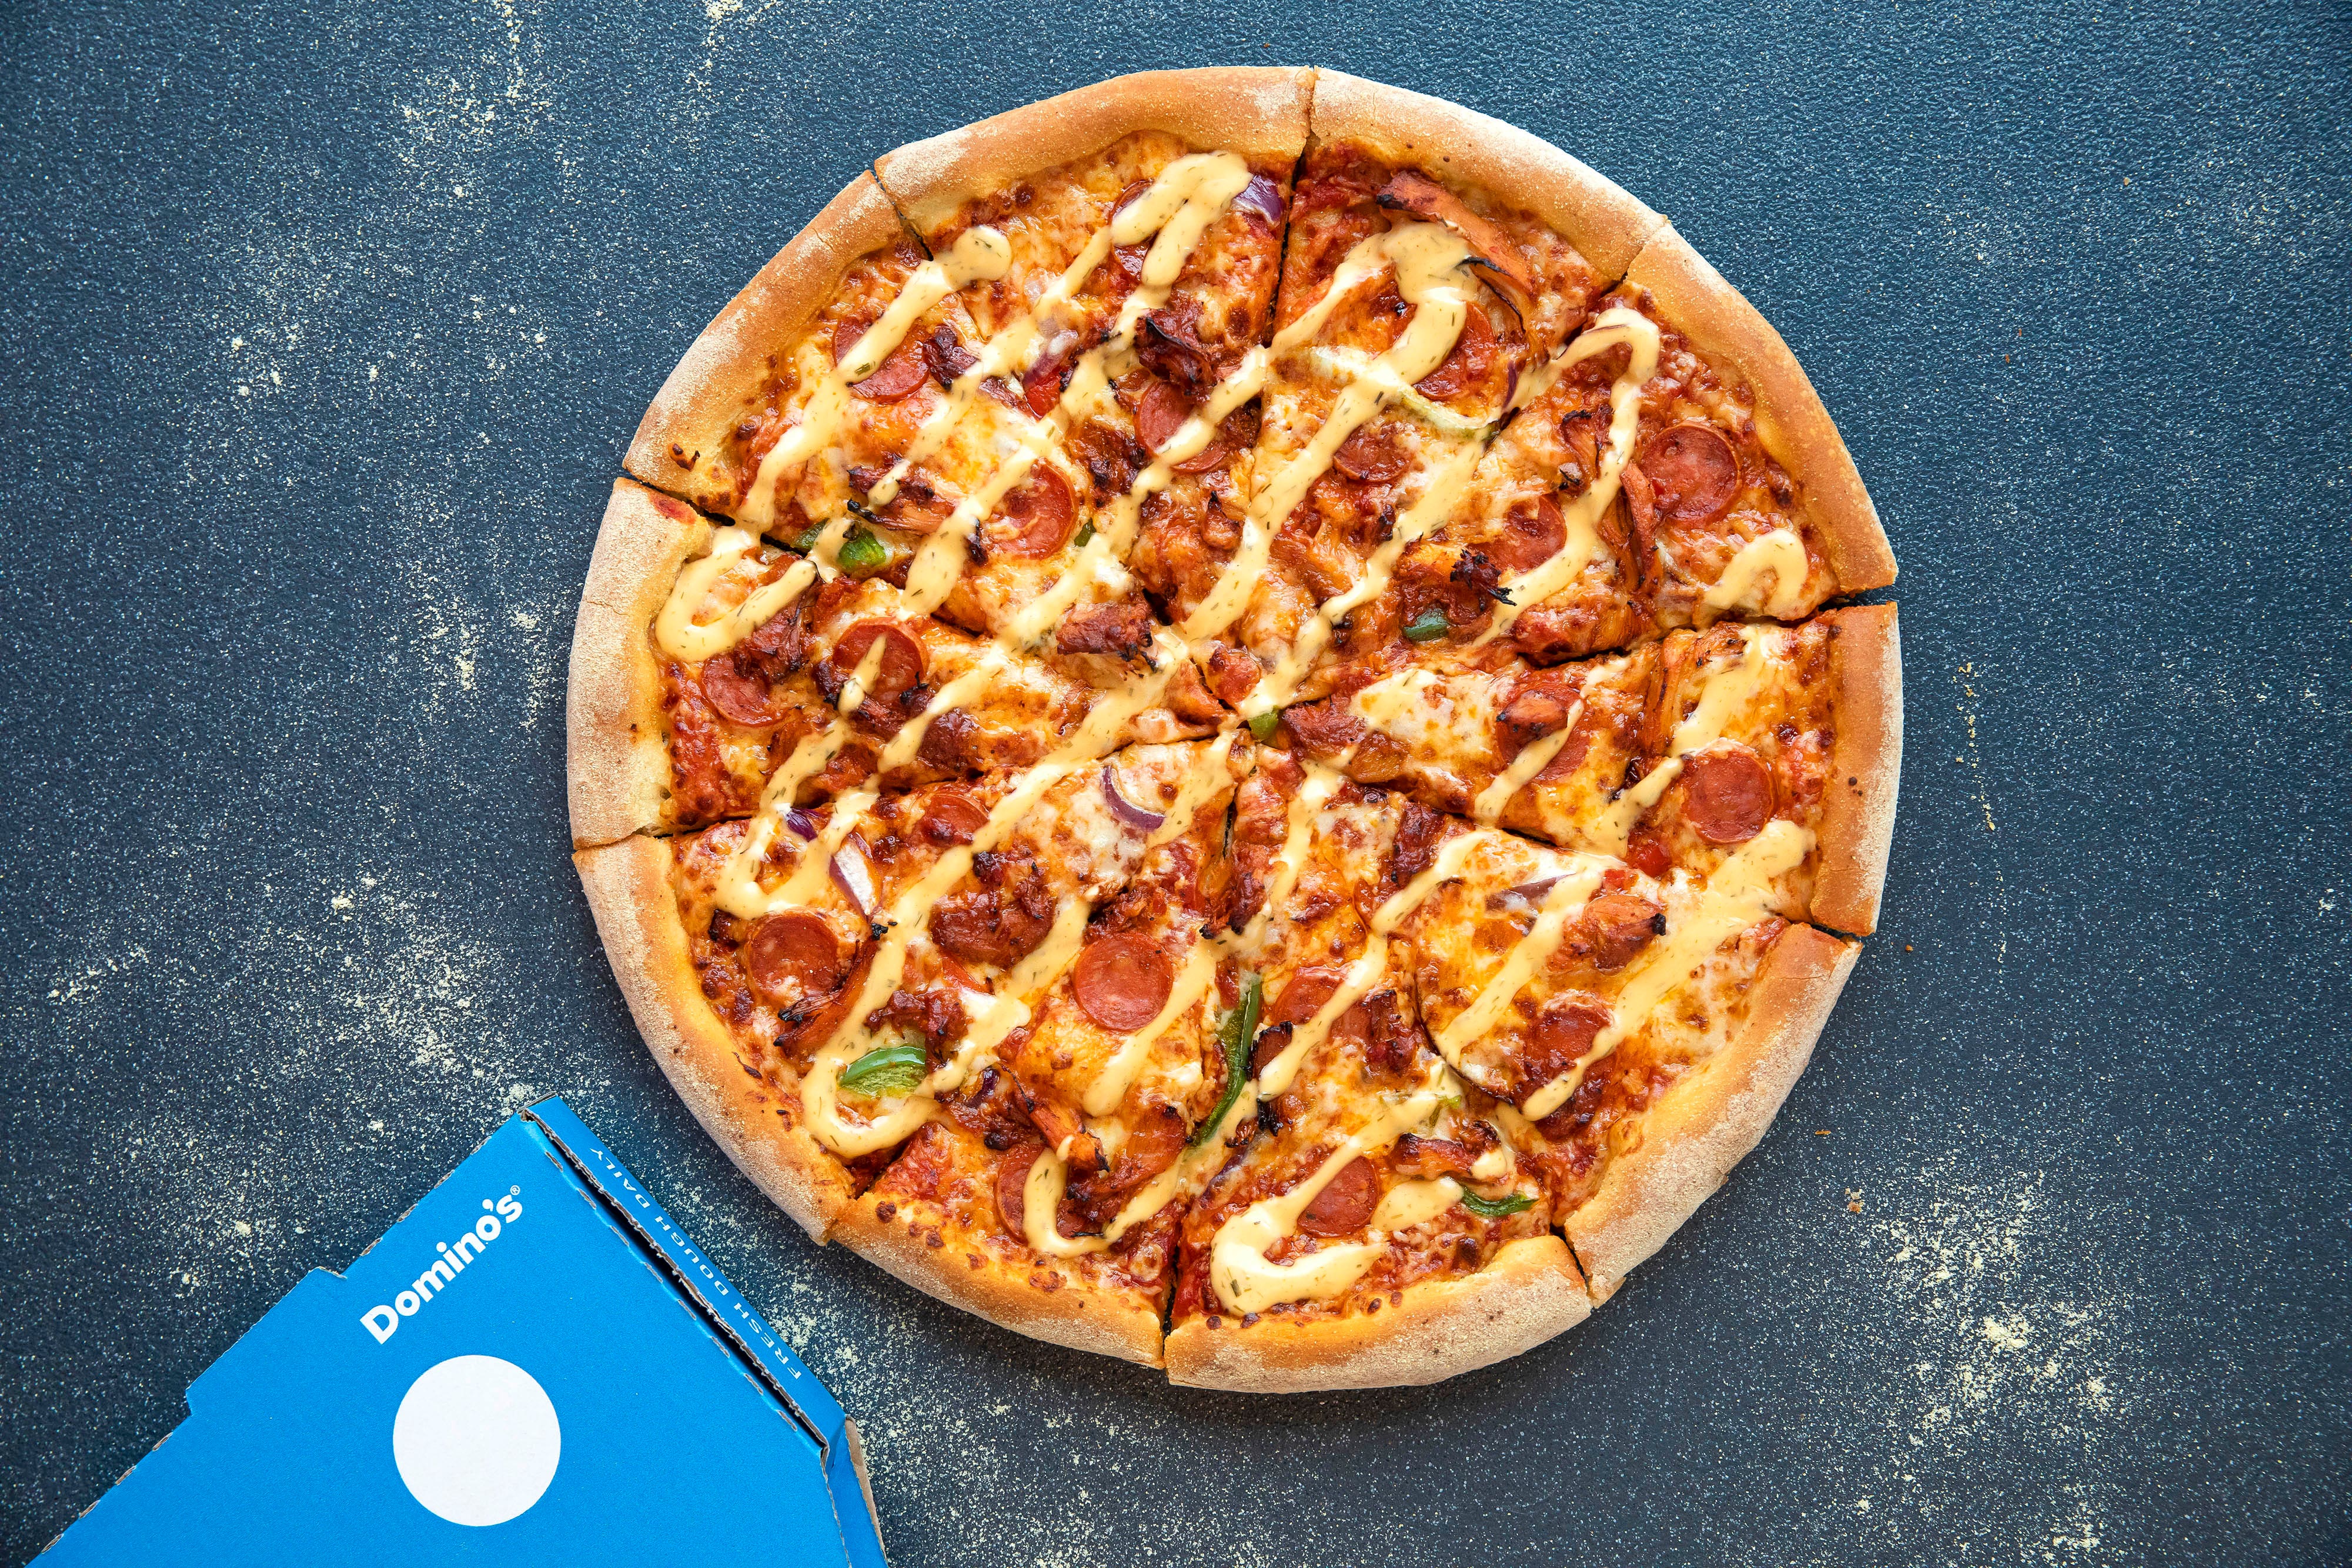 Domino’s is launch a meal deal